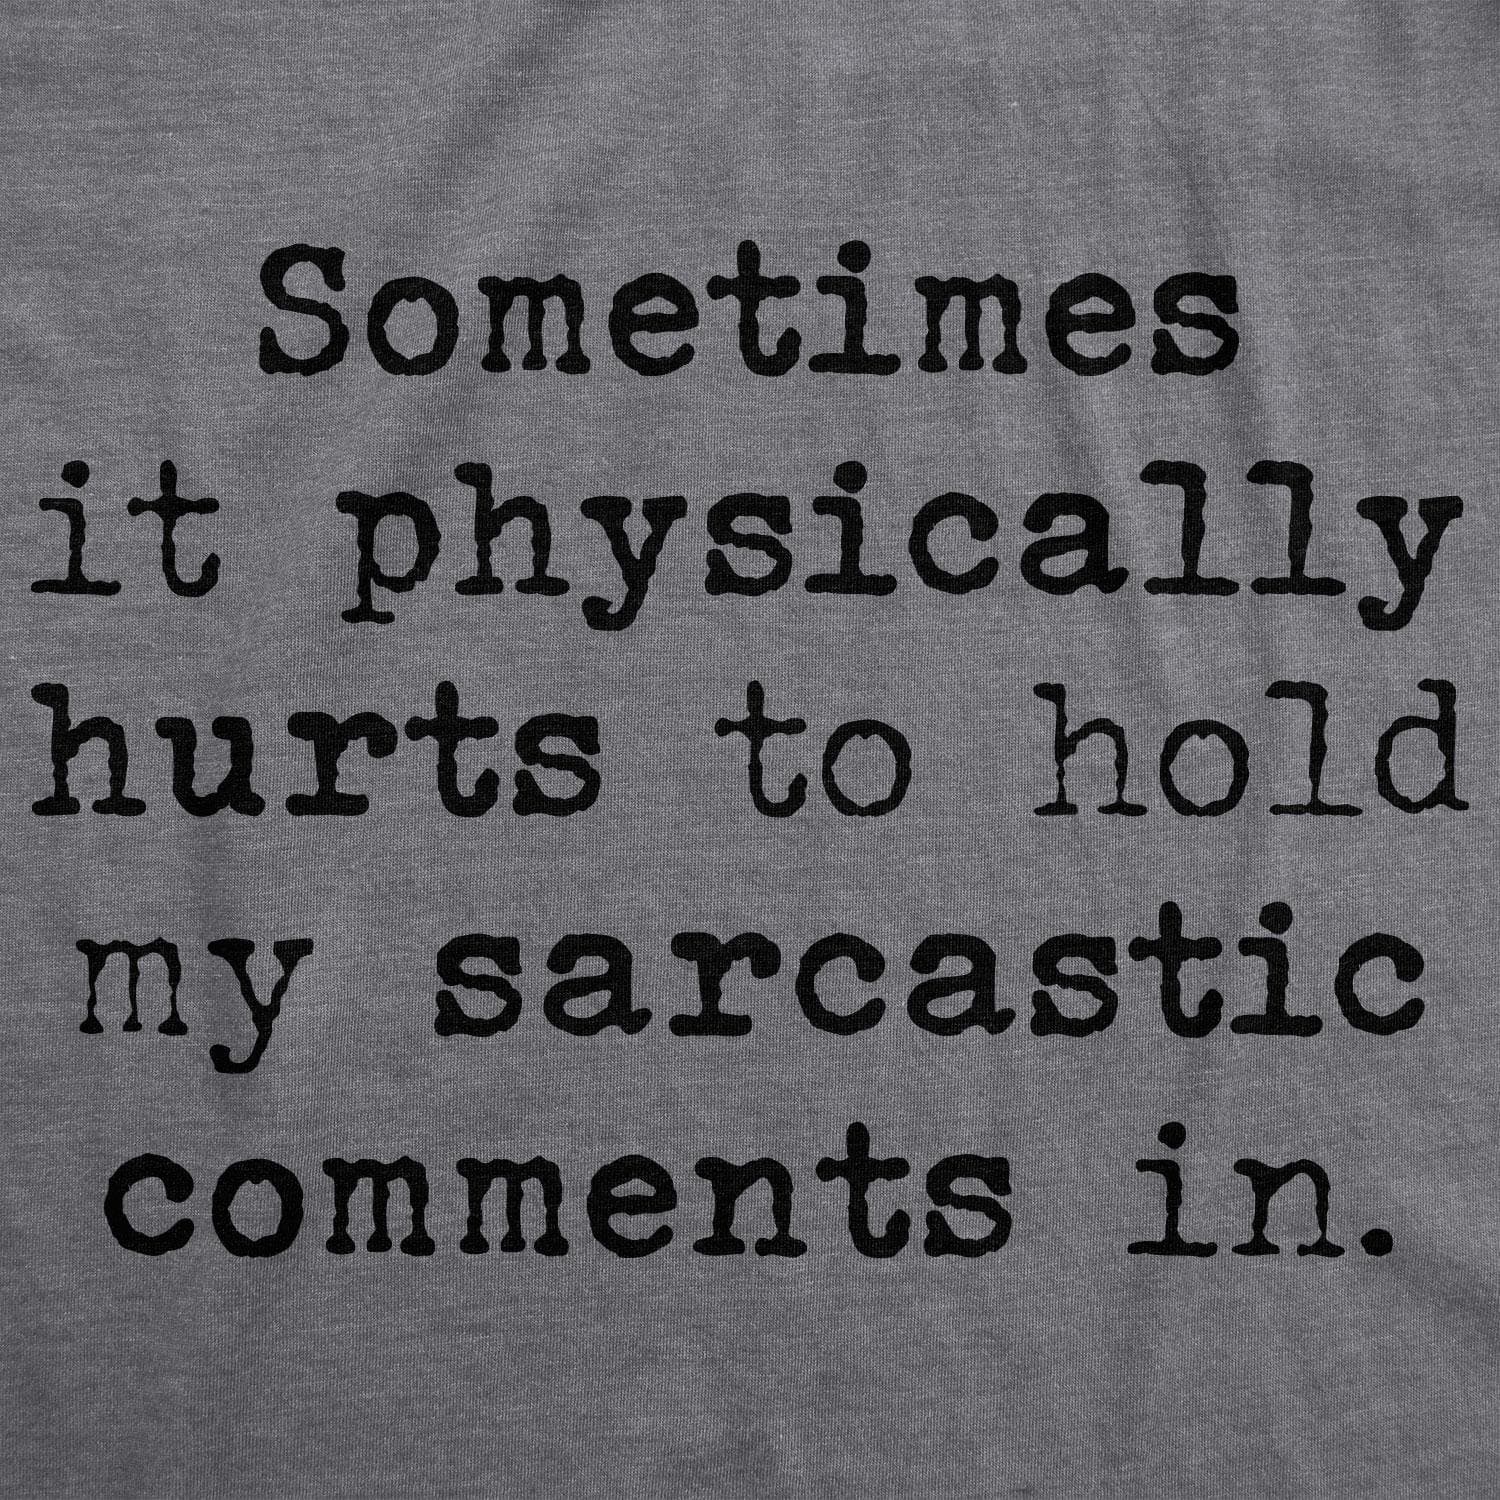 Sometimes It Physically Hurts To Hold My Sarcastic Comments In Women's Tshirt - Crazy Dog T-Shirts